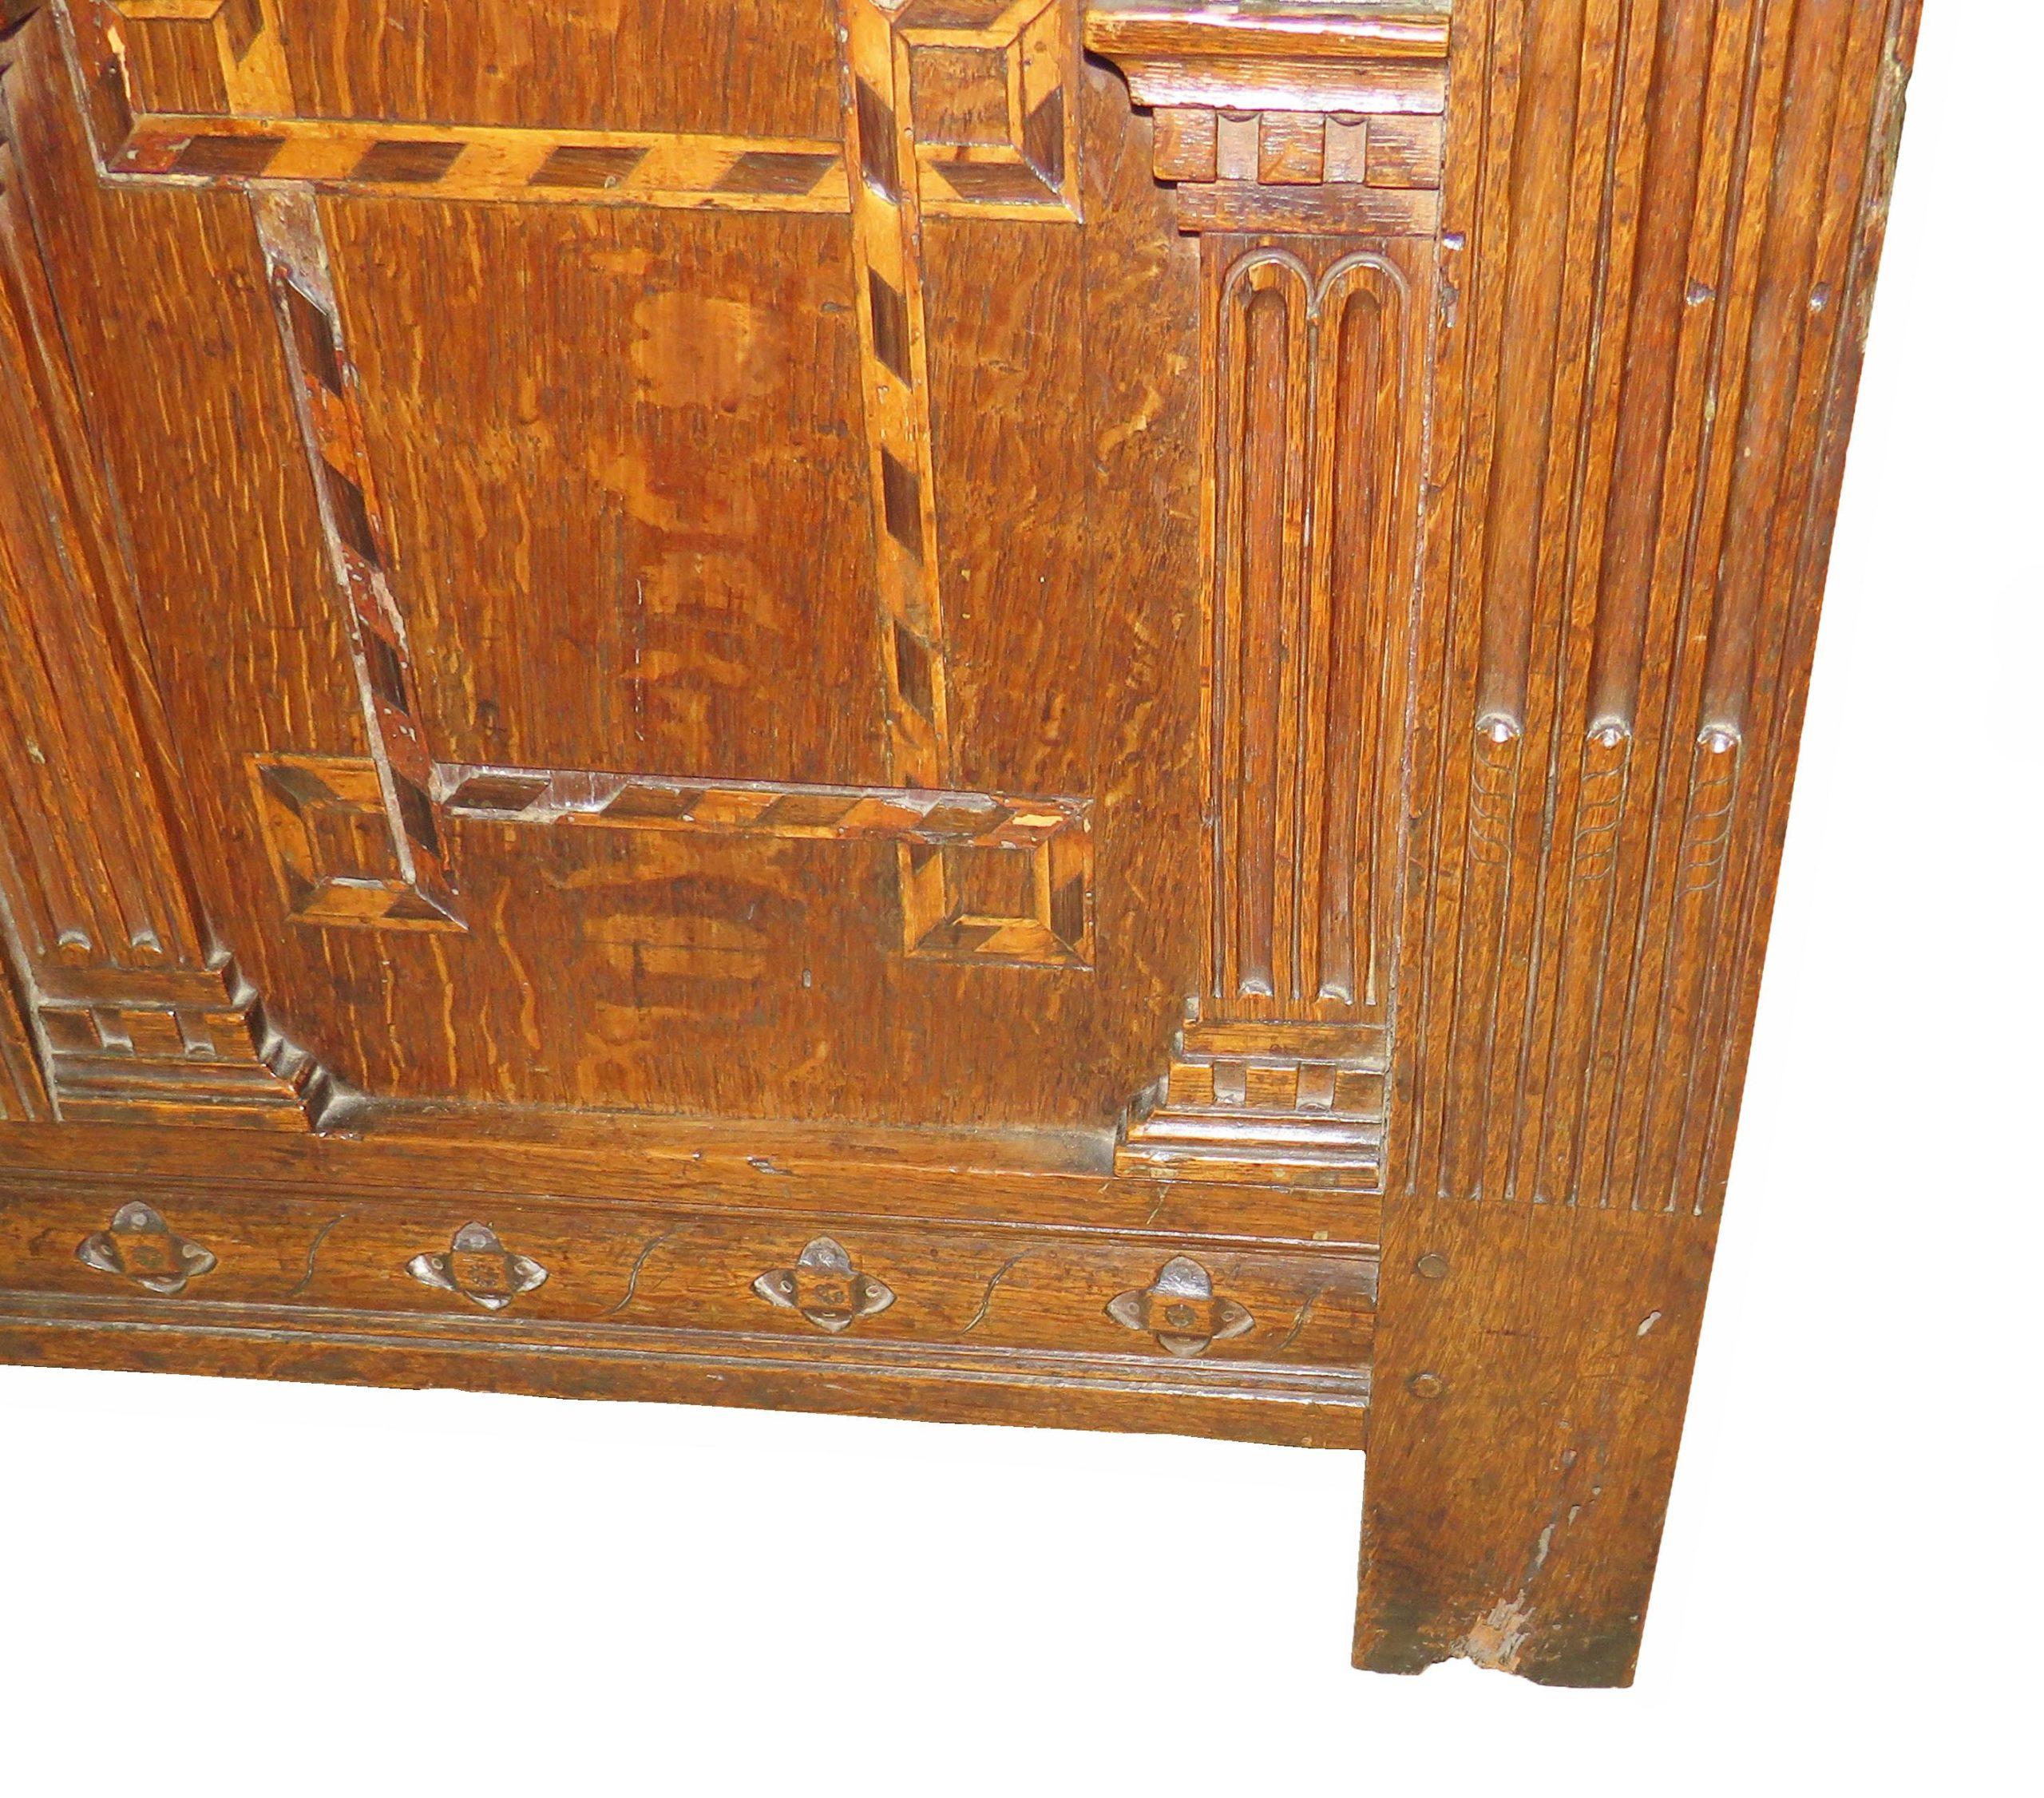 17th Century (Charles the I) English oak coffer of good bold proportions with unusual plank lid and original hinges, lock and key, over carved arcade front including interlocking flower heads, reeded arches, reeded stiles and chequered inlay